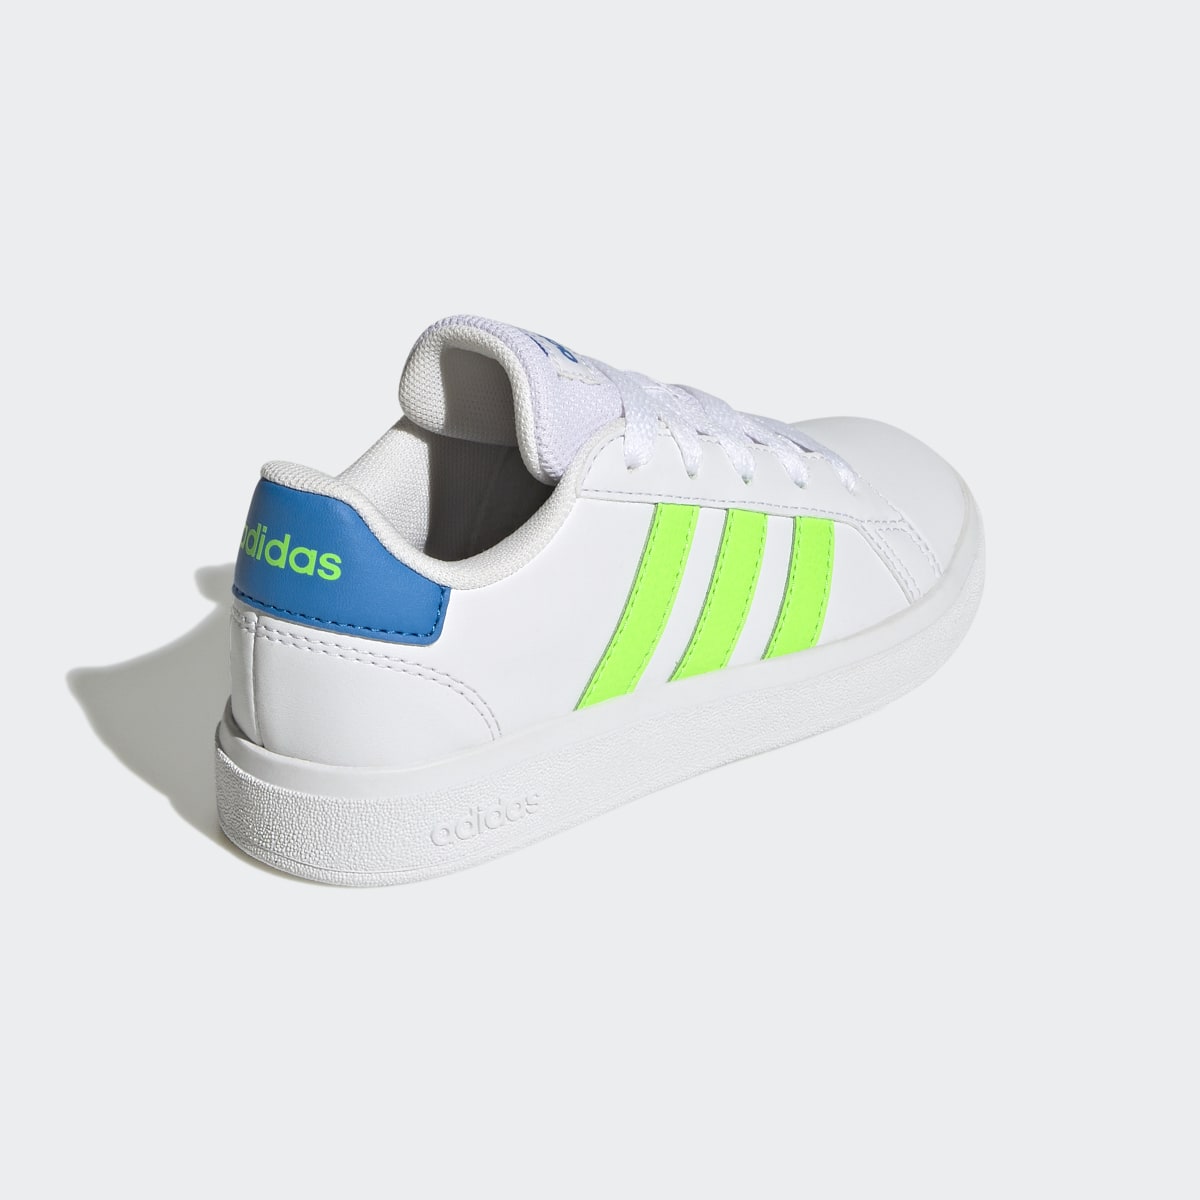 Adidas Grand Court Lifestyle Tennis Lace-Up Shoes. 6